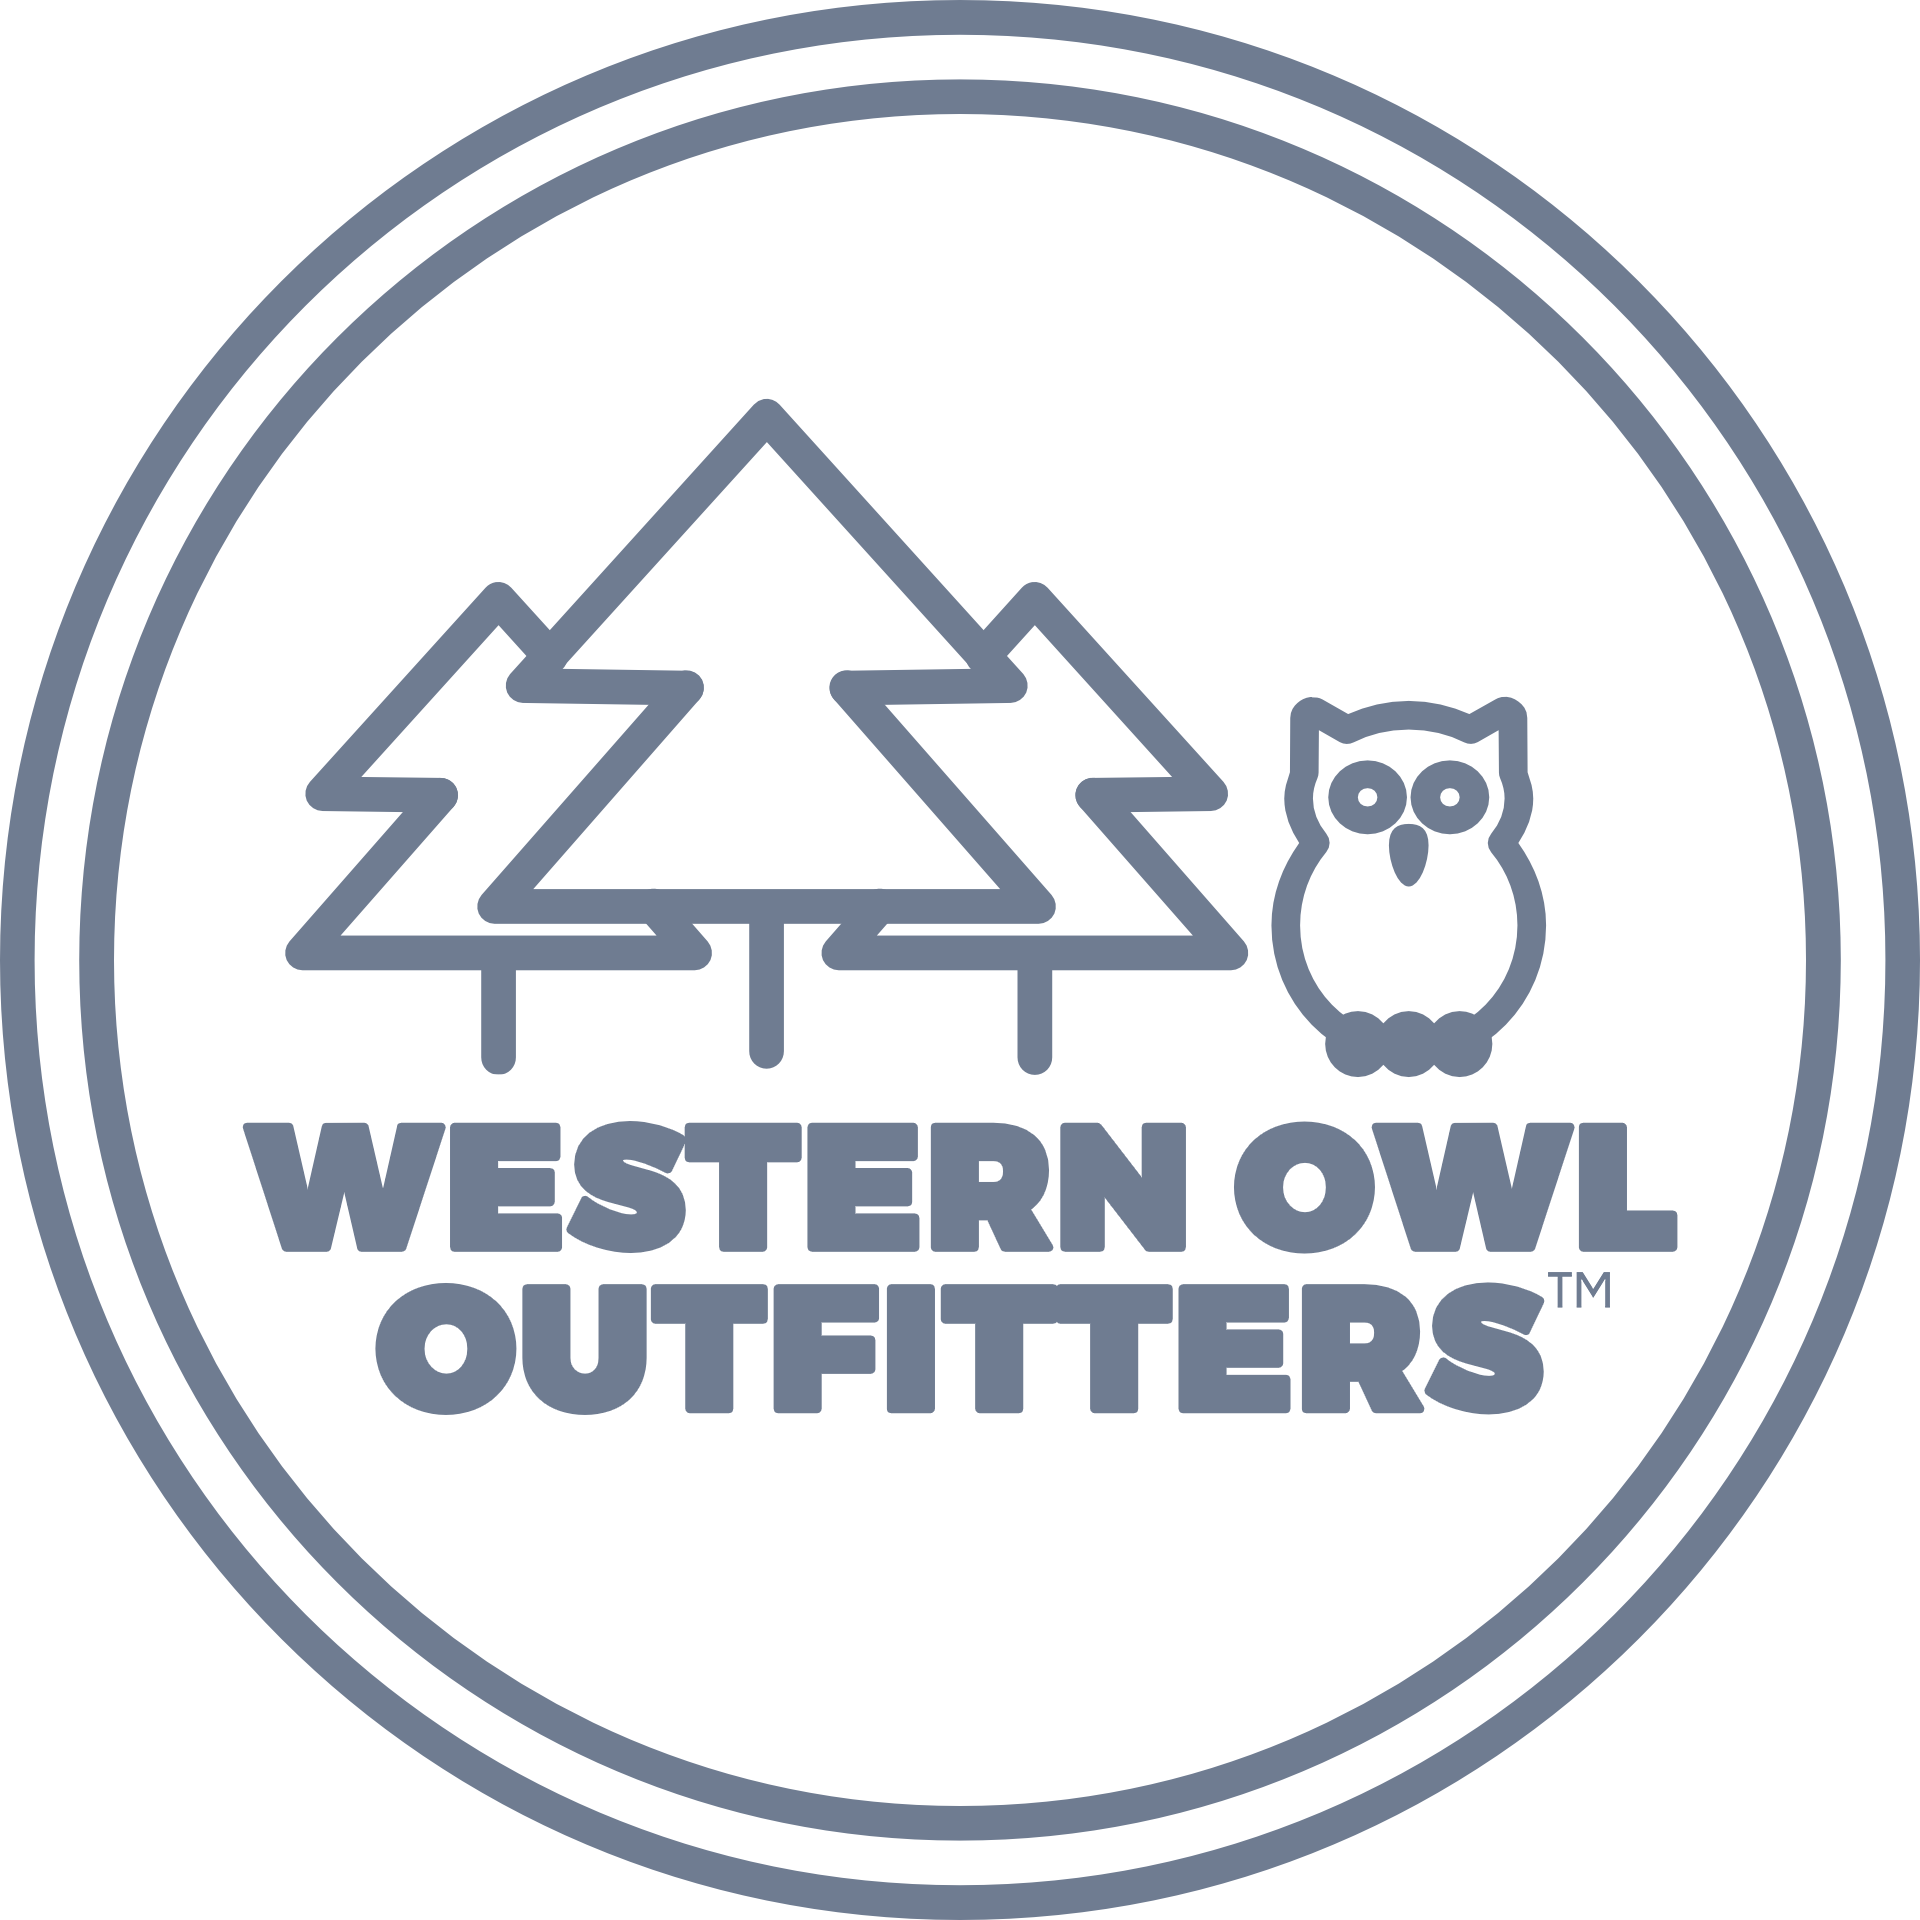 Western Owl Outfitters